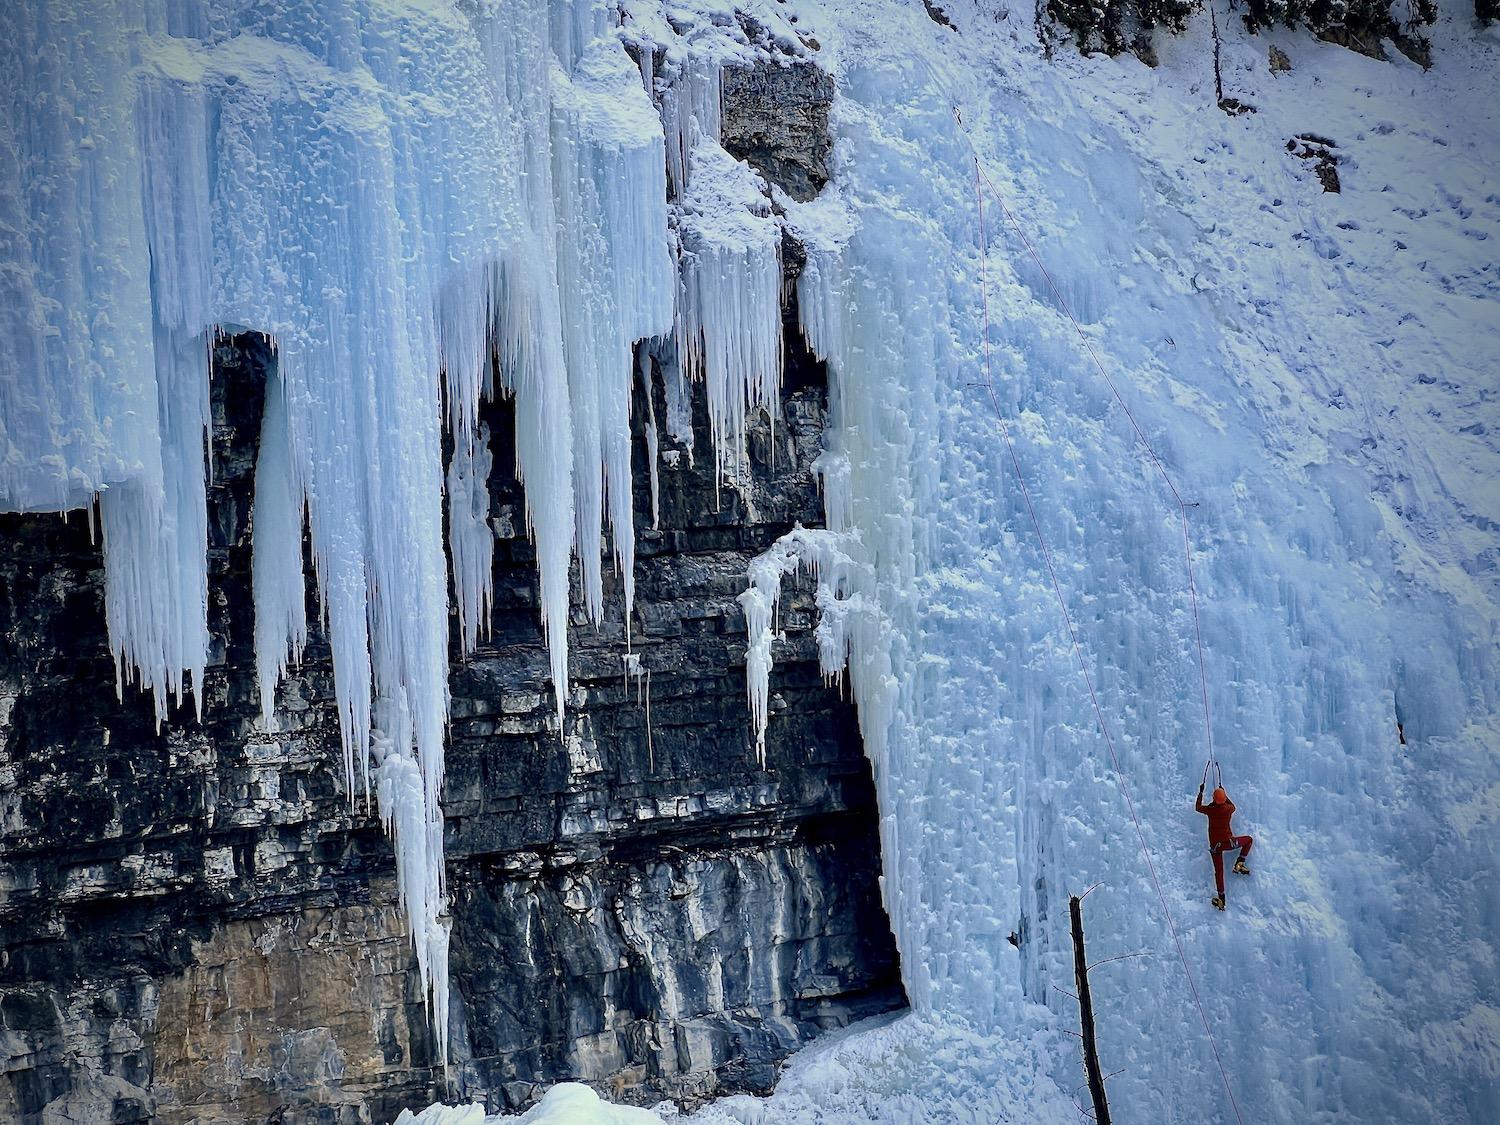 If you're doing the Johnston Canyon icewalk, watch for ice climbers in Banff National Park in Alberta.